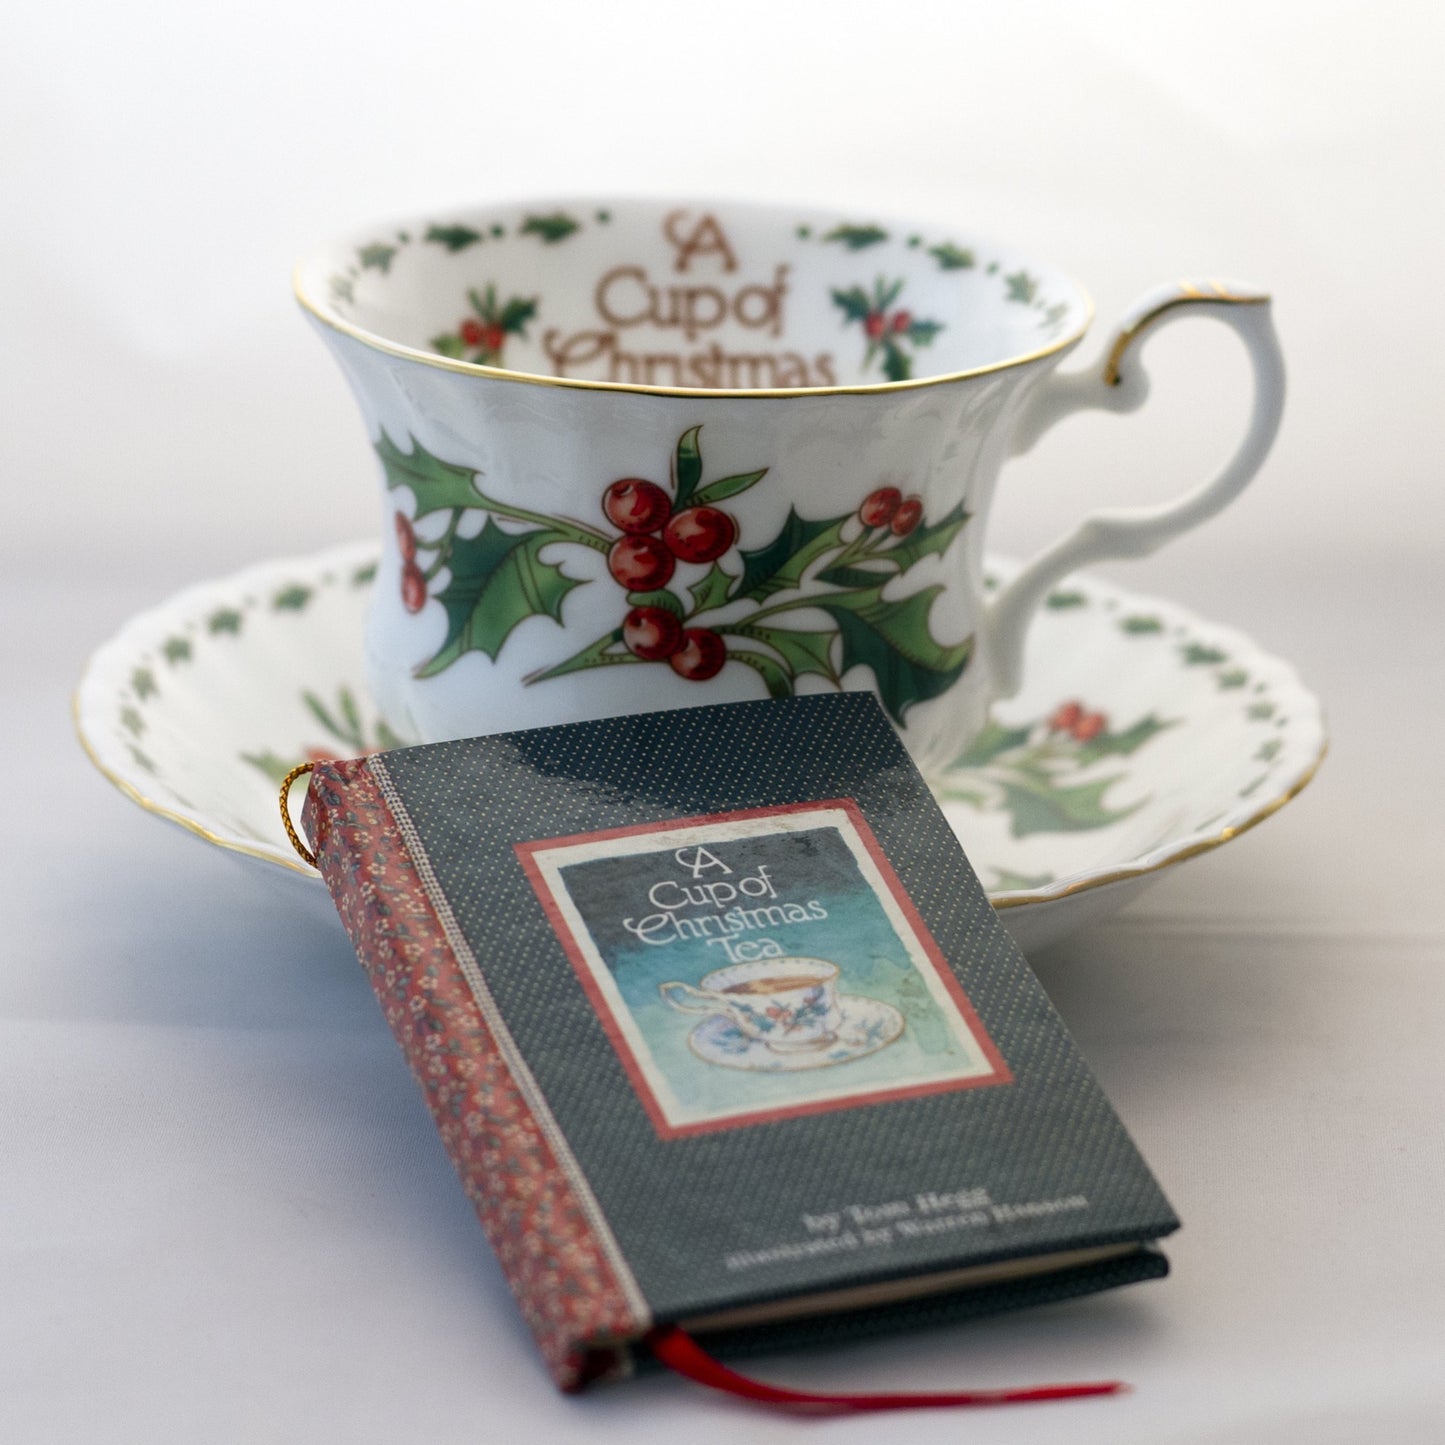 Waldman House “A CUP OF CHRISTMAS TEA” Footed Teacup and Saucer with Matching Ornament Size Tom Hegg Book Circa 1992